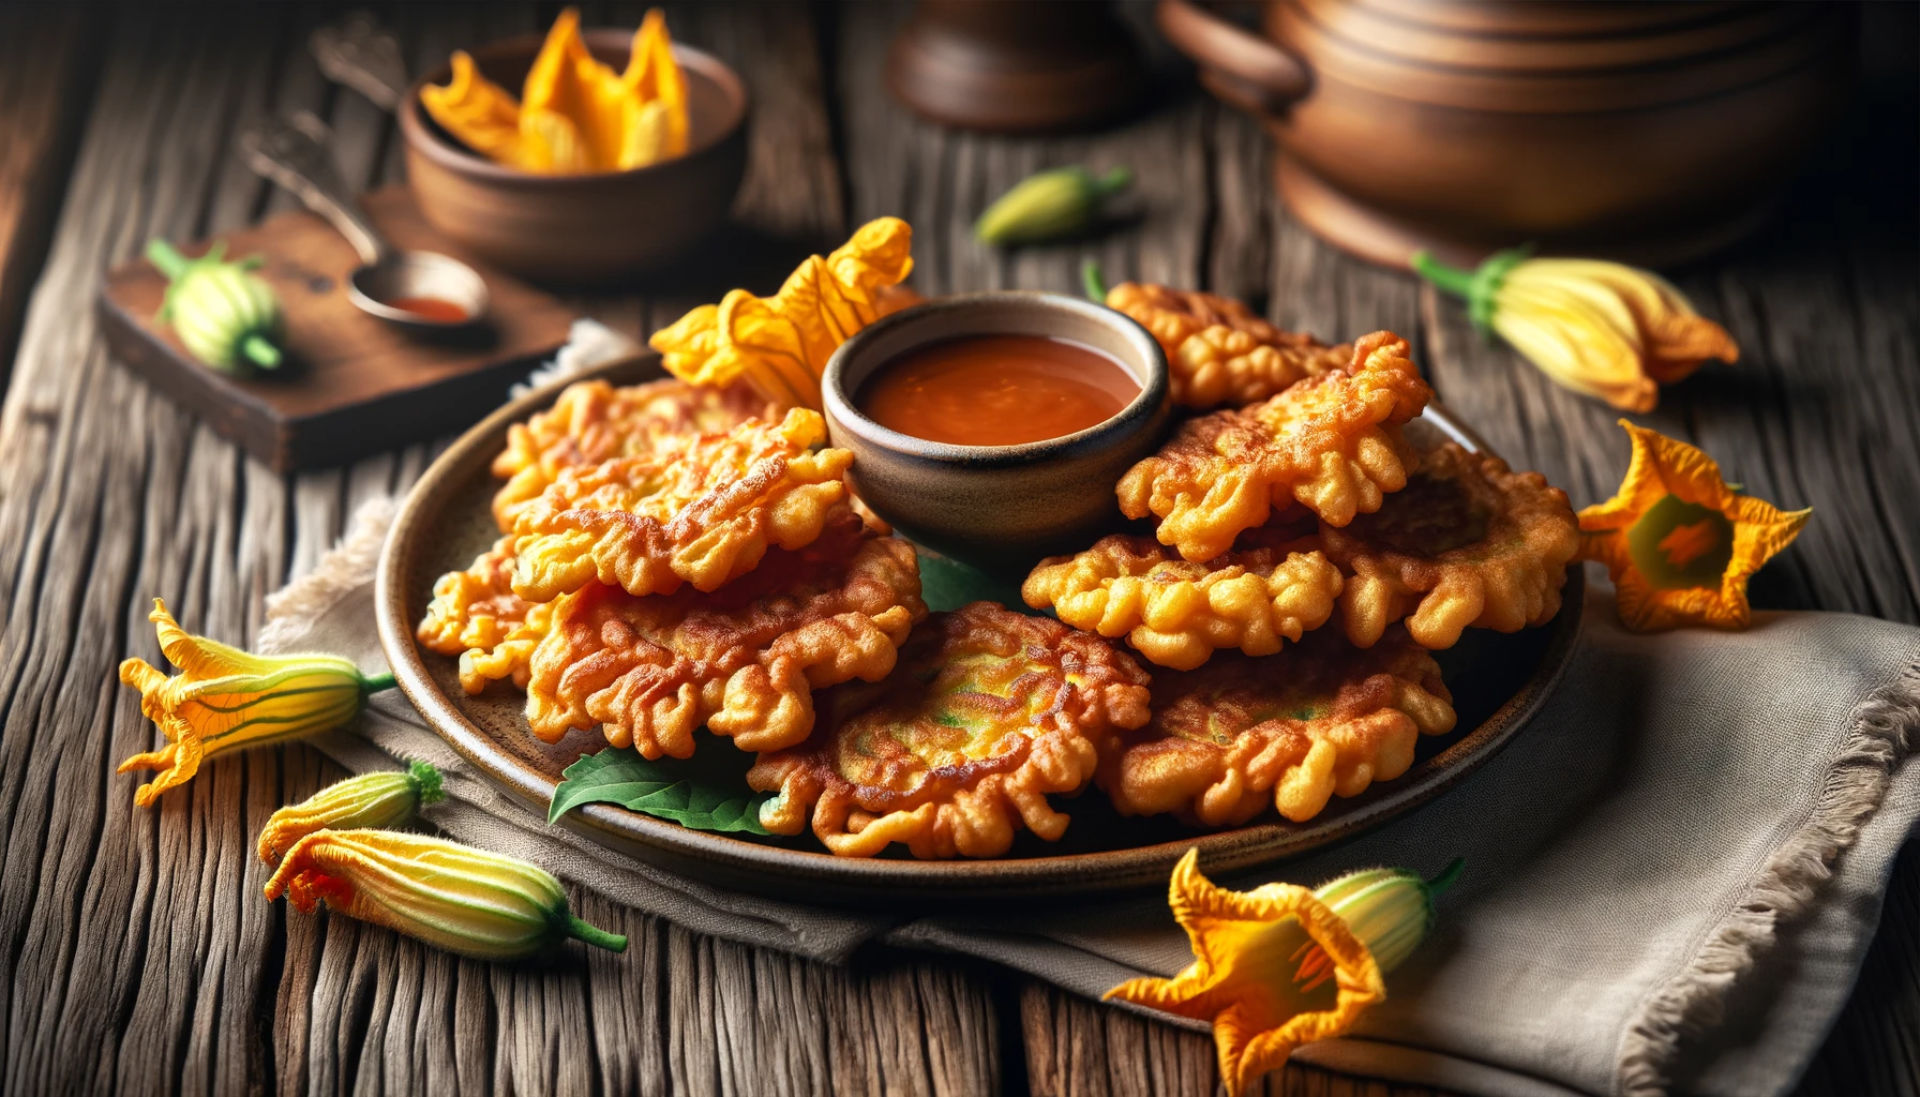 A high-definition image showcasing golden squash blossom fritters on a rustic serving plate, with a small bowl of dipping sauce on the side. The fritters are perfectly fried, showing a crispy exterior with visible hints of the delicate squash blossoms peeking through the batter. Set on a wooden table, the image captures the home-cooked and appetising nature of the dish. The background is blurred, focusing on the fritters and their crispy texture, while a few fresh squash blossoms are also visible, adding to the rustic and homemade feel of the scene.